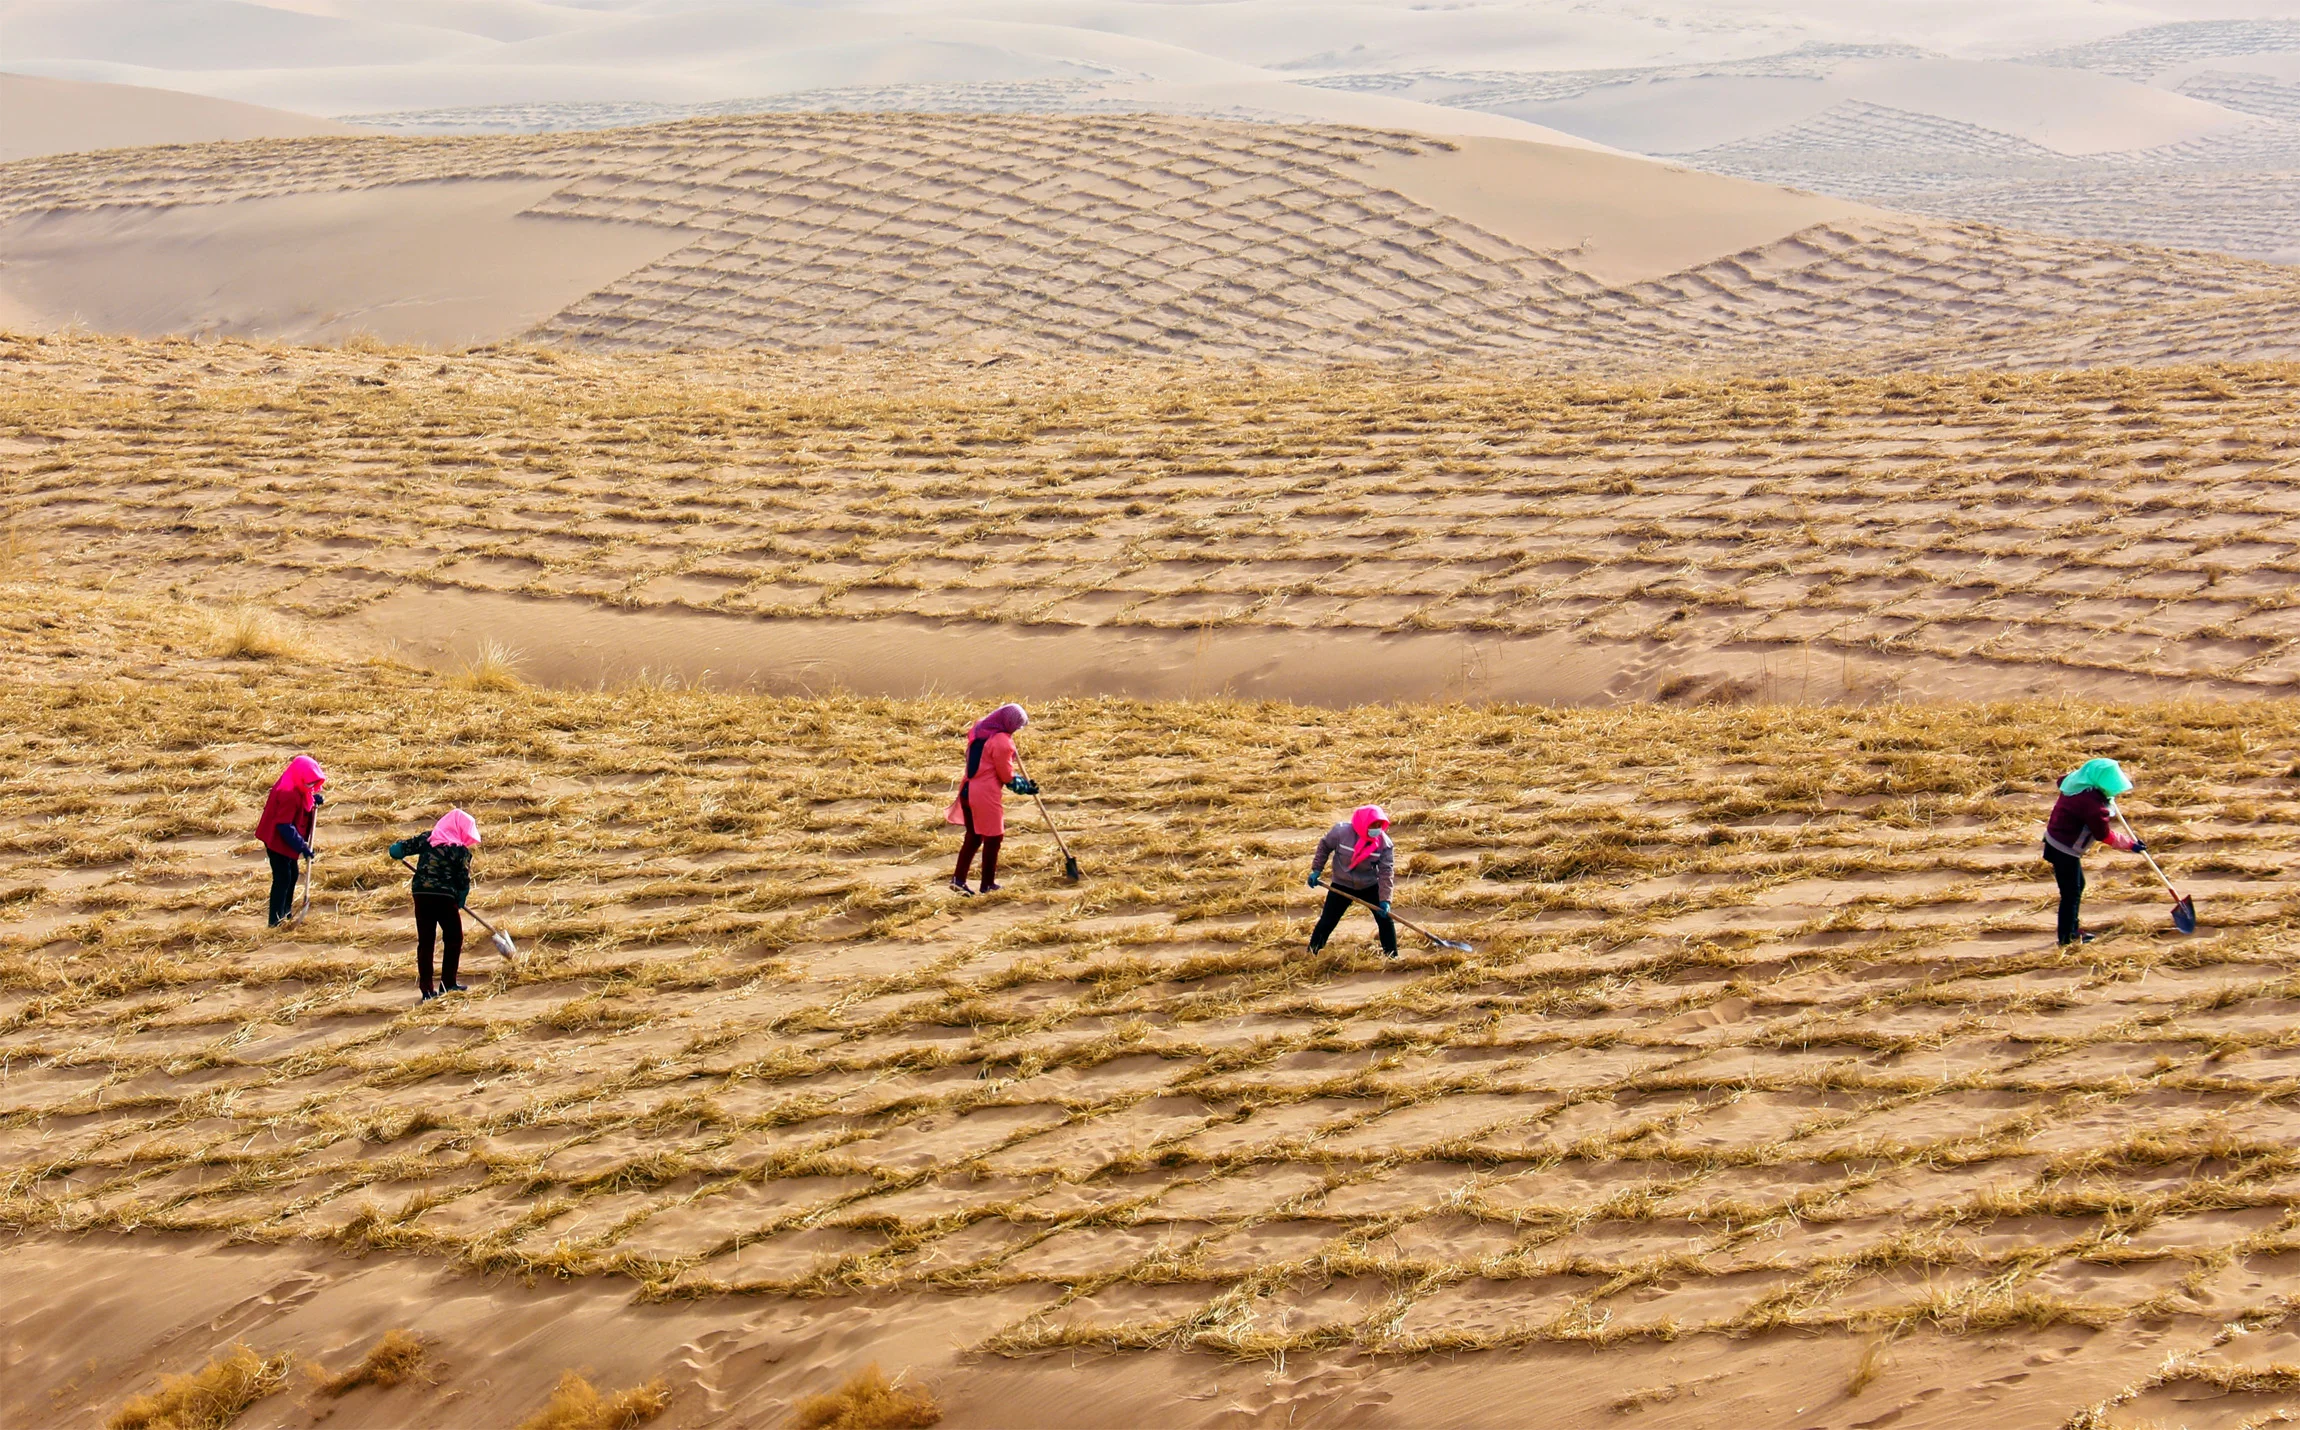 Encroaching deserts are destroying farmland in Zhangye City, China. Residents press sand barriers with wheat straw to hold off desert expansion. (Costfoto/Future Publishing via Getty Images)